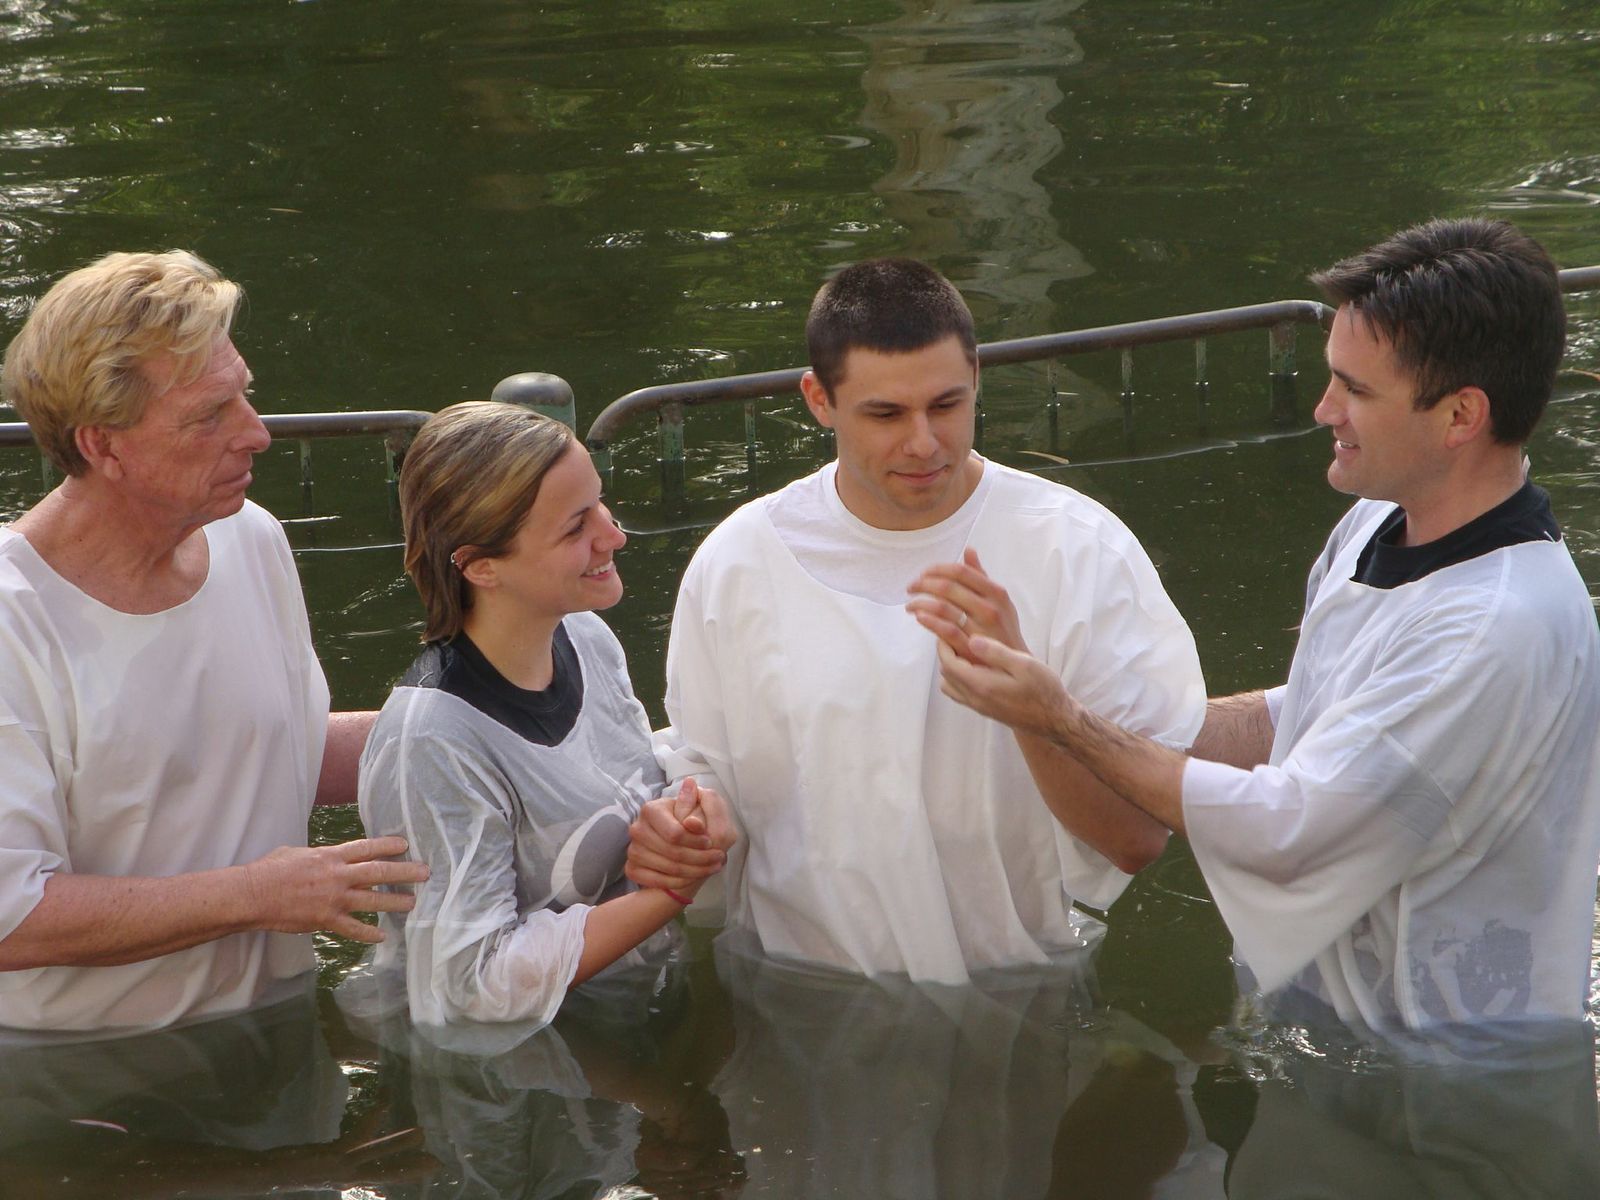 During the trip, many were baptized in the  River Jordan by Campbellsville University  faculty and staff members, Dr. Ted Taylor,  Dr. Shane Garrison, Dr. Scott Wigginton  and David Wray. From left: Taylor, Shelby  Hicks, Dalton Hicks and Garrison.